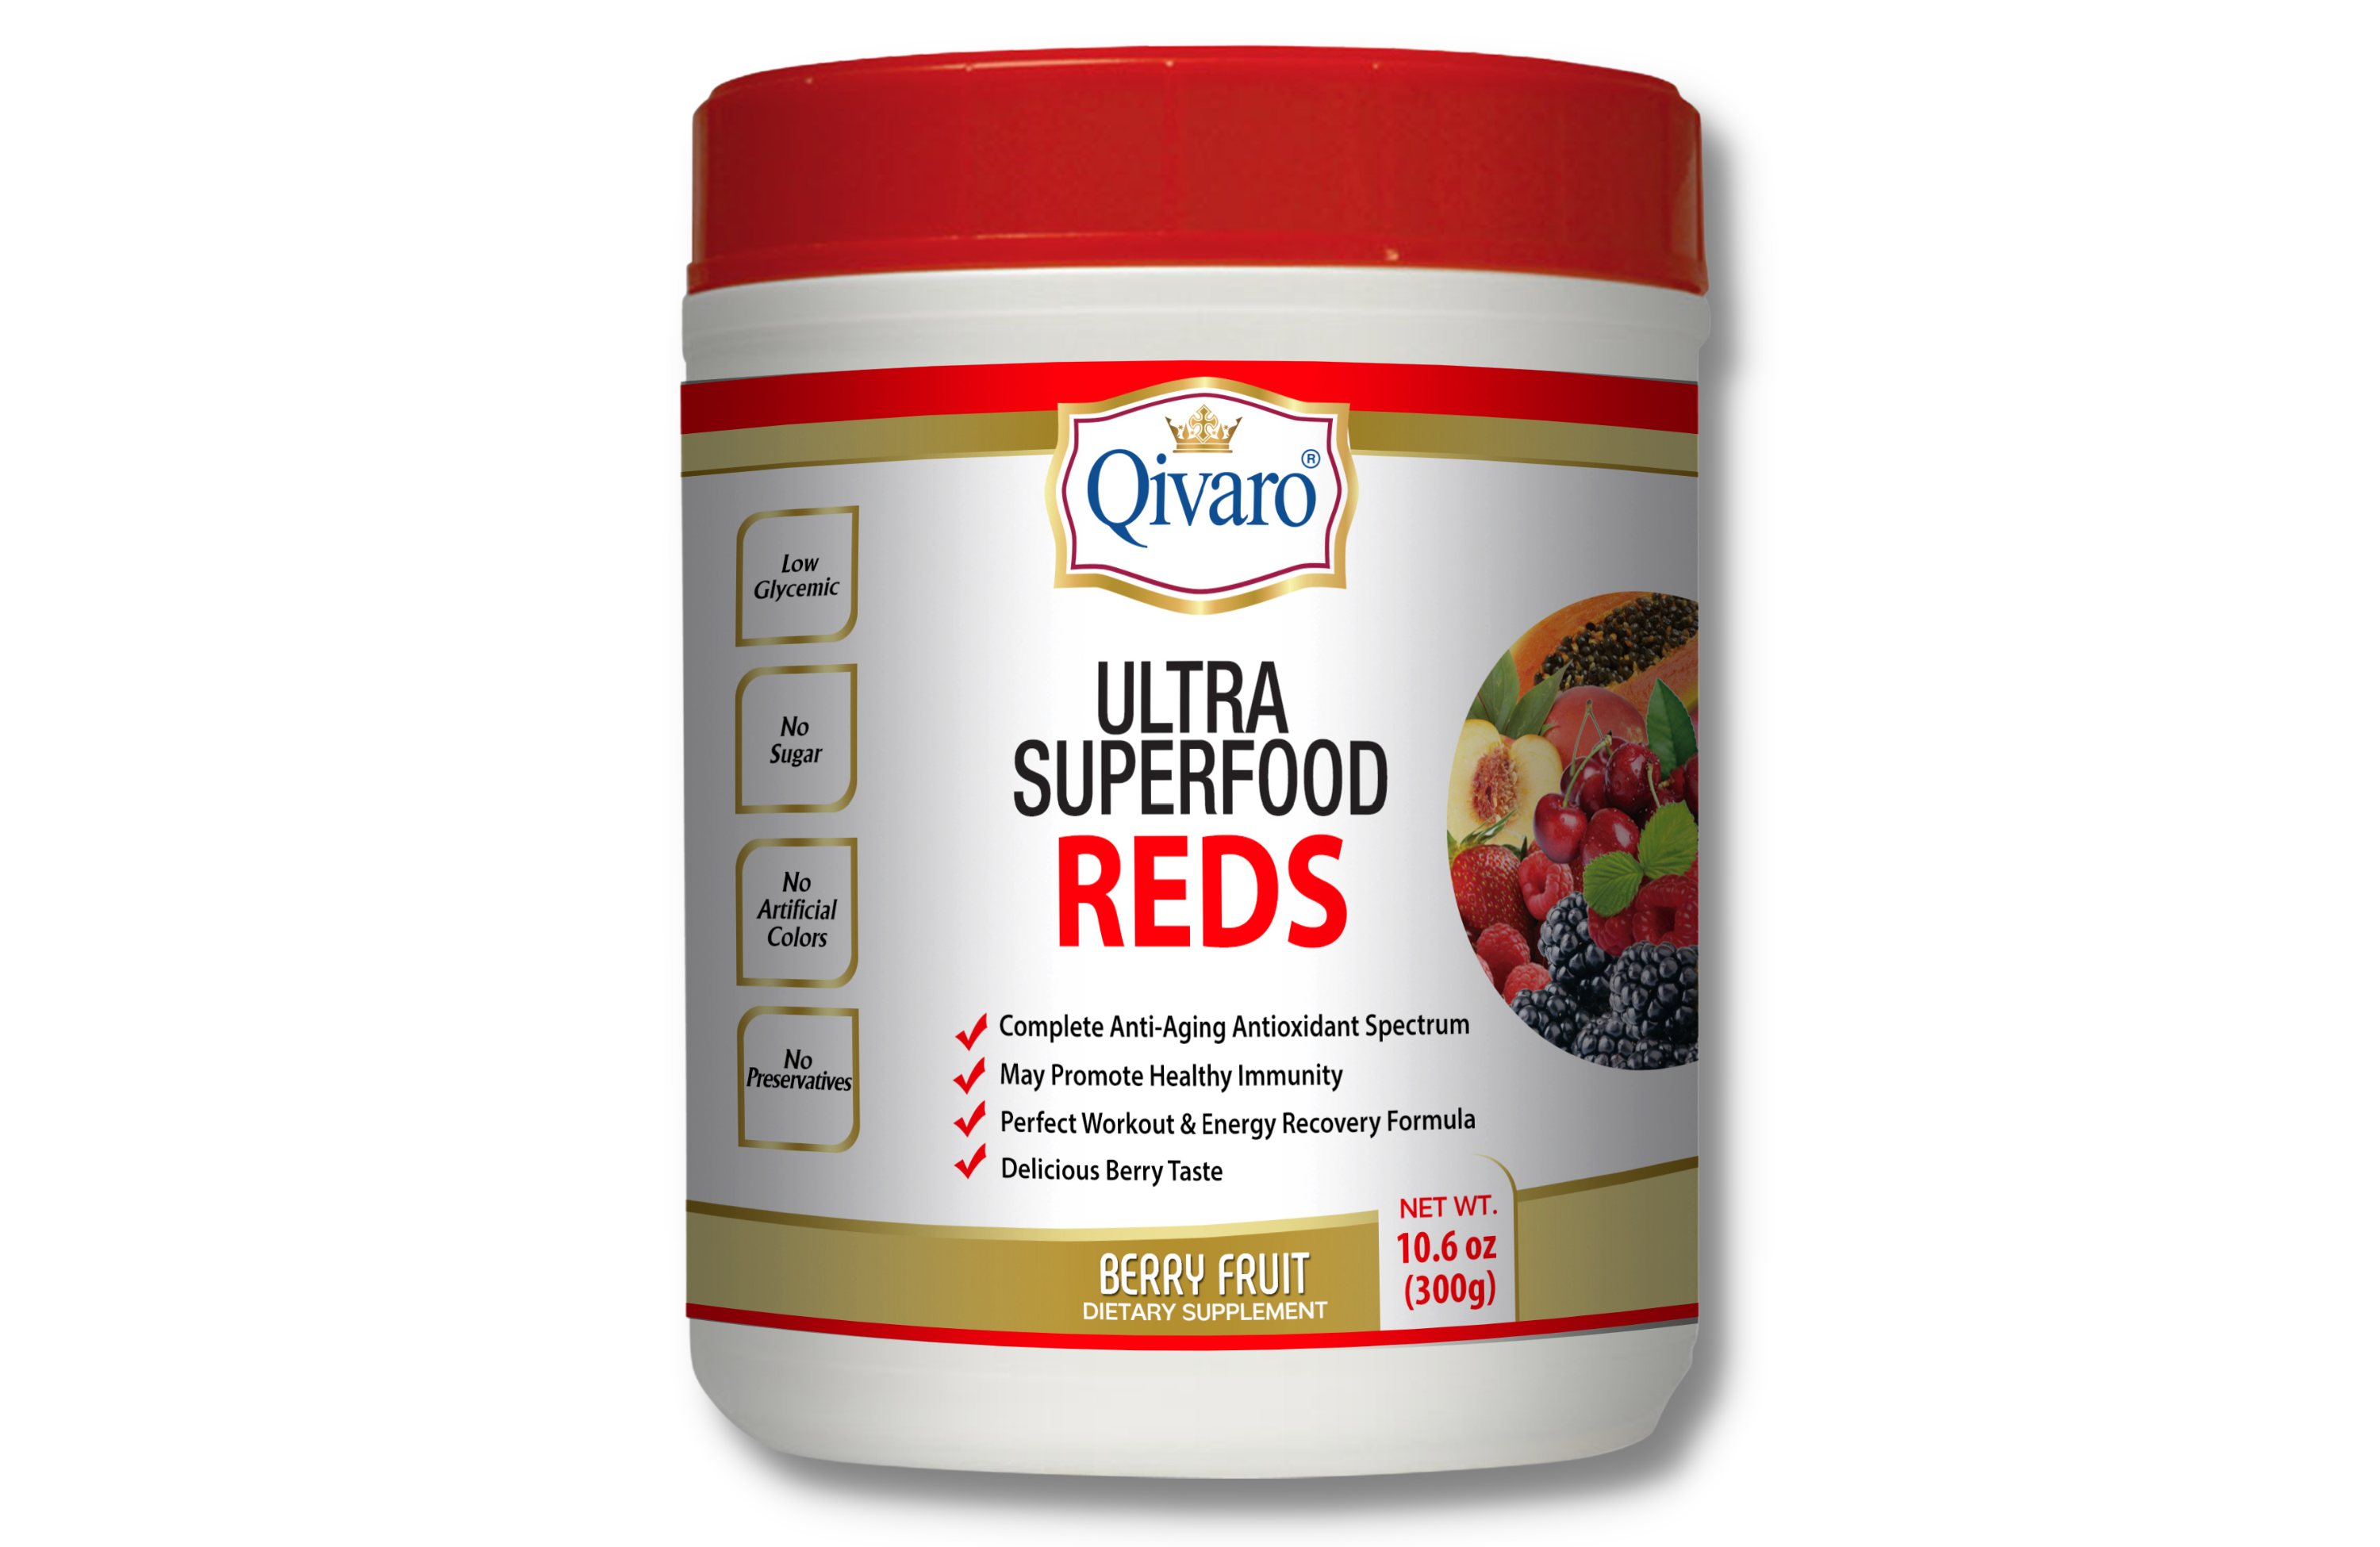 QIVP03 - Ultra SuperFood Reds By Qivaro - Berry Fruit (300 grams)